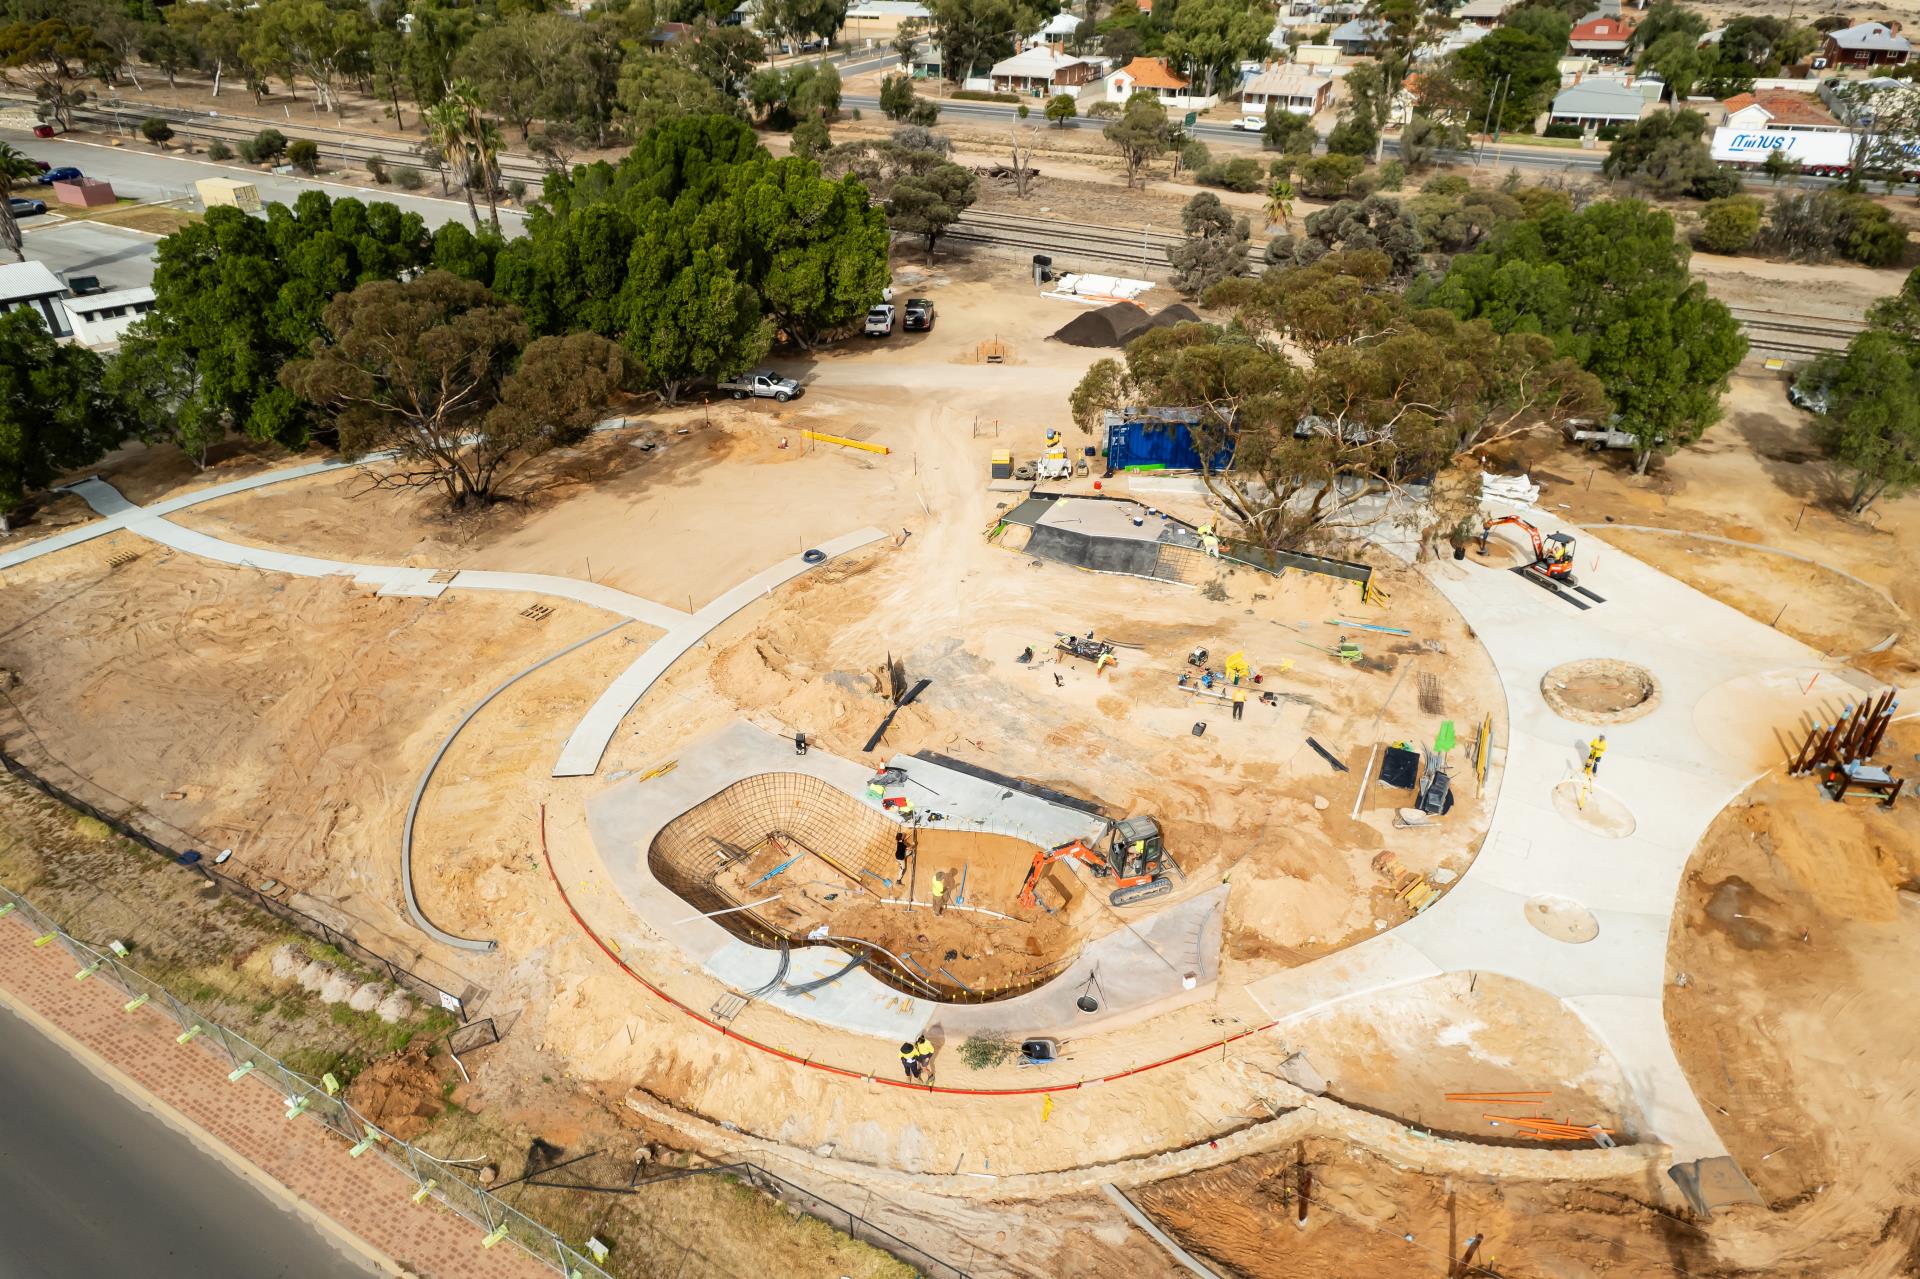 MEDIA RELEASE: REVITALISATION OF APEX PARK ENTERS EXCITING NEW PHASE